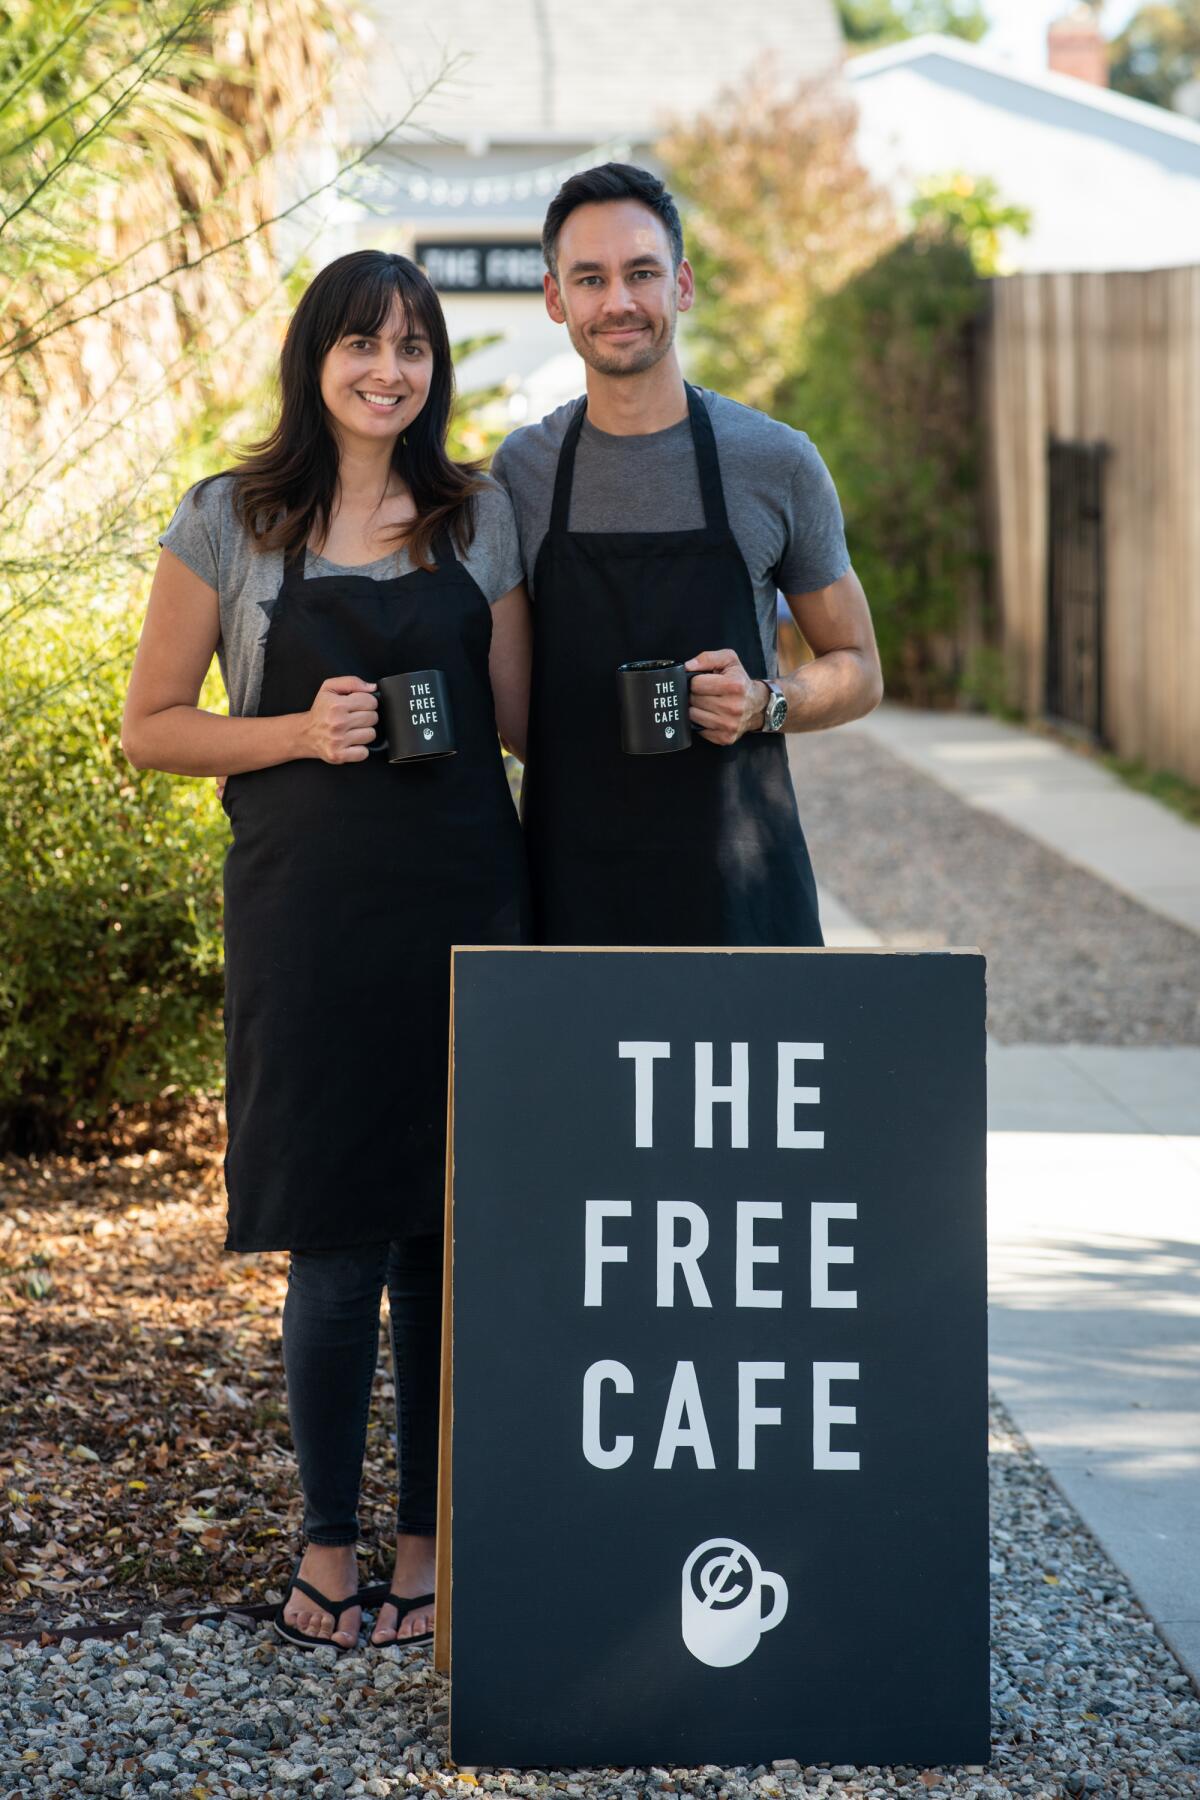 The Free Cafe hosts Irene Silva and Michael Rippens